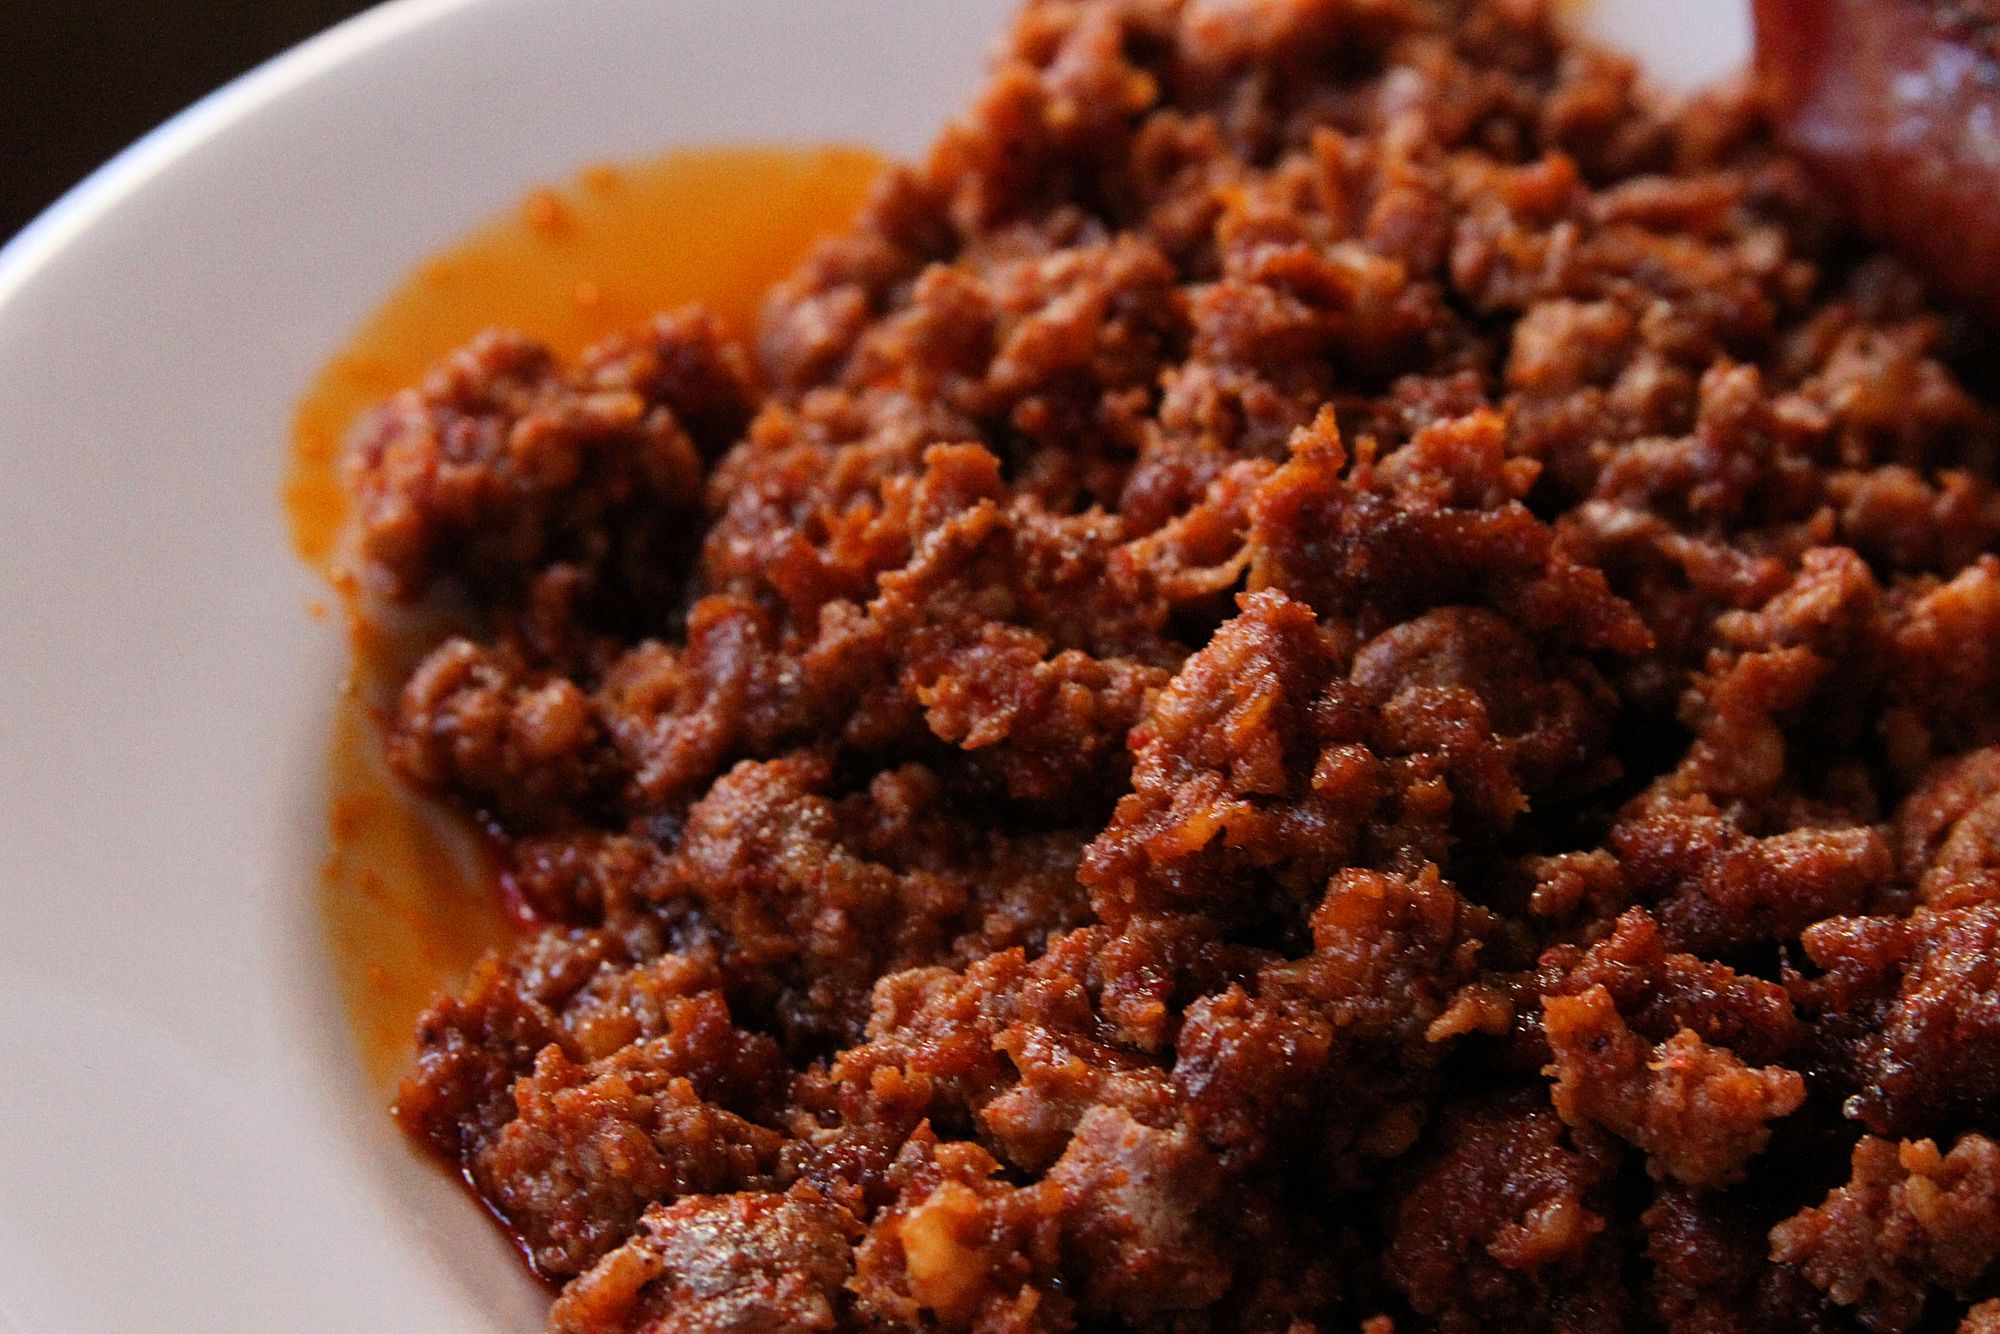 How to Make and Use Mexican Chorizo at Home